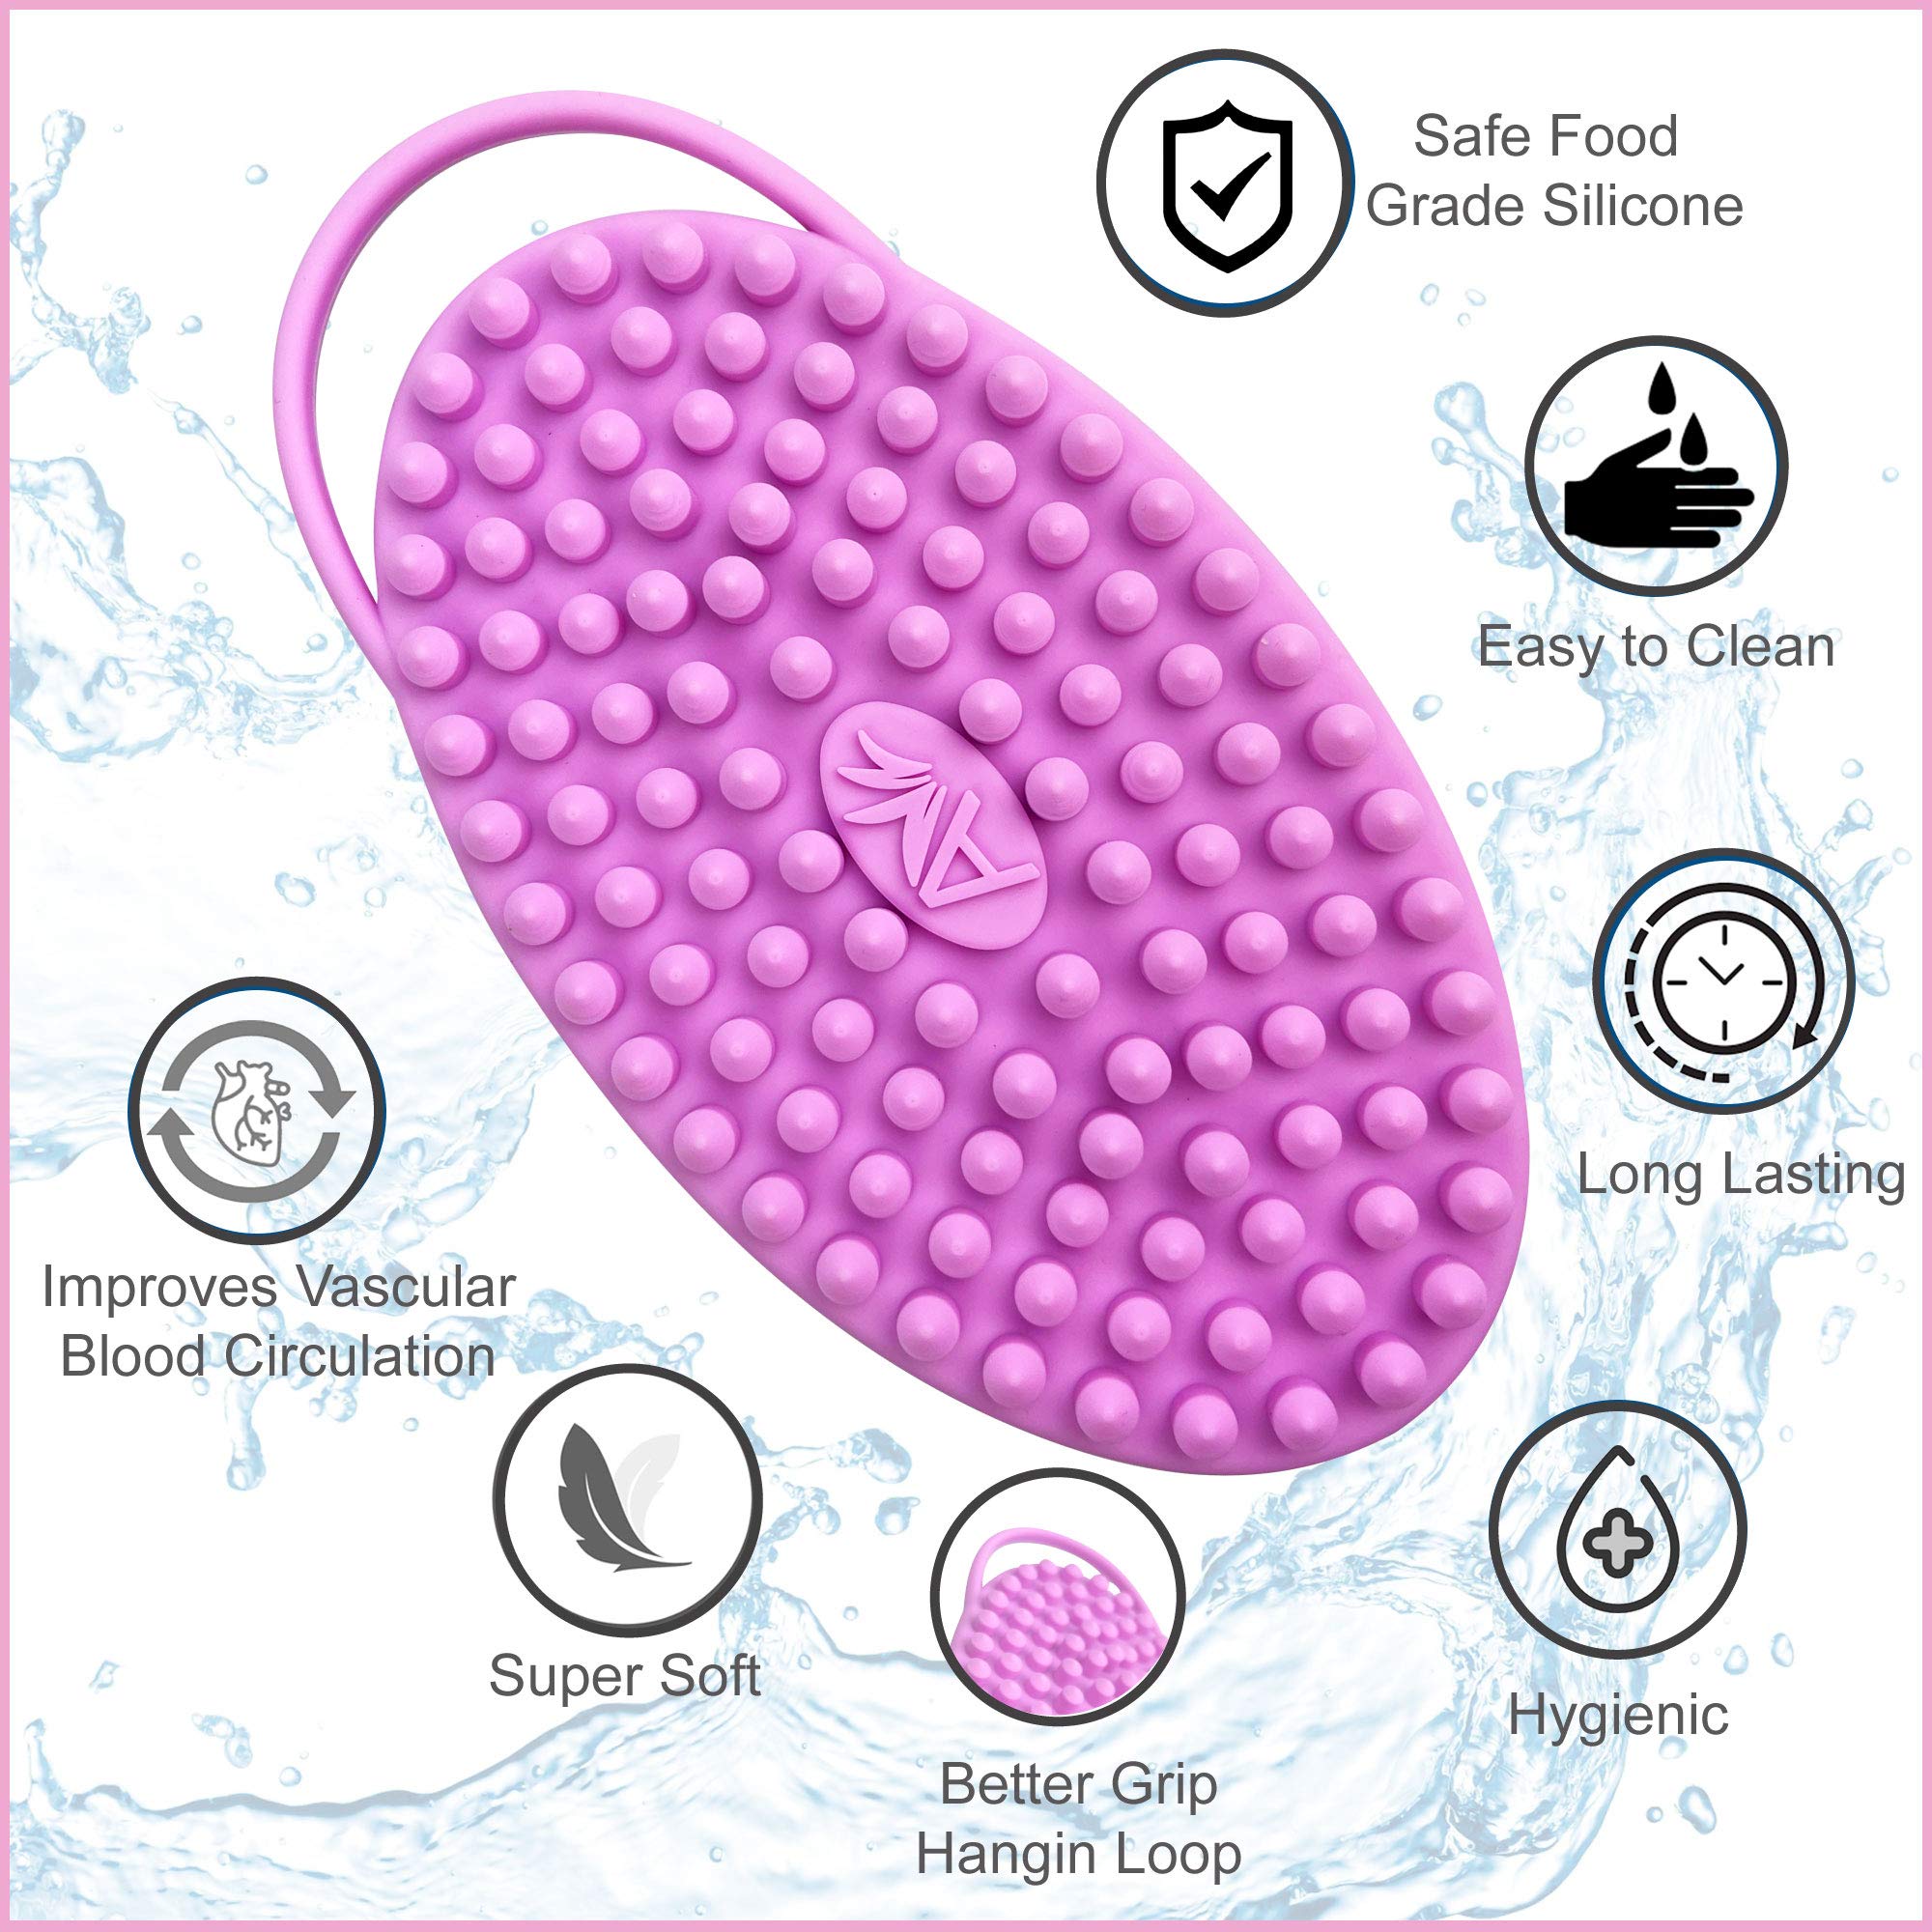 Avilana Exfoliating Silicone Body Scrubber Easy to Clean, Lathers Well, Long Lasting, and More Hygienic Than Traditional Loofah (Style 1, Blue)